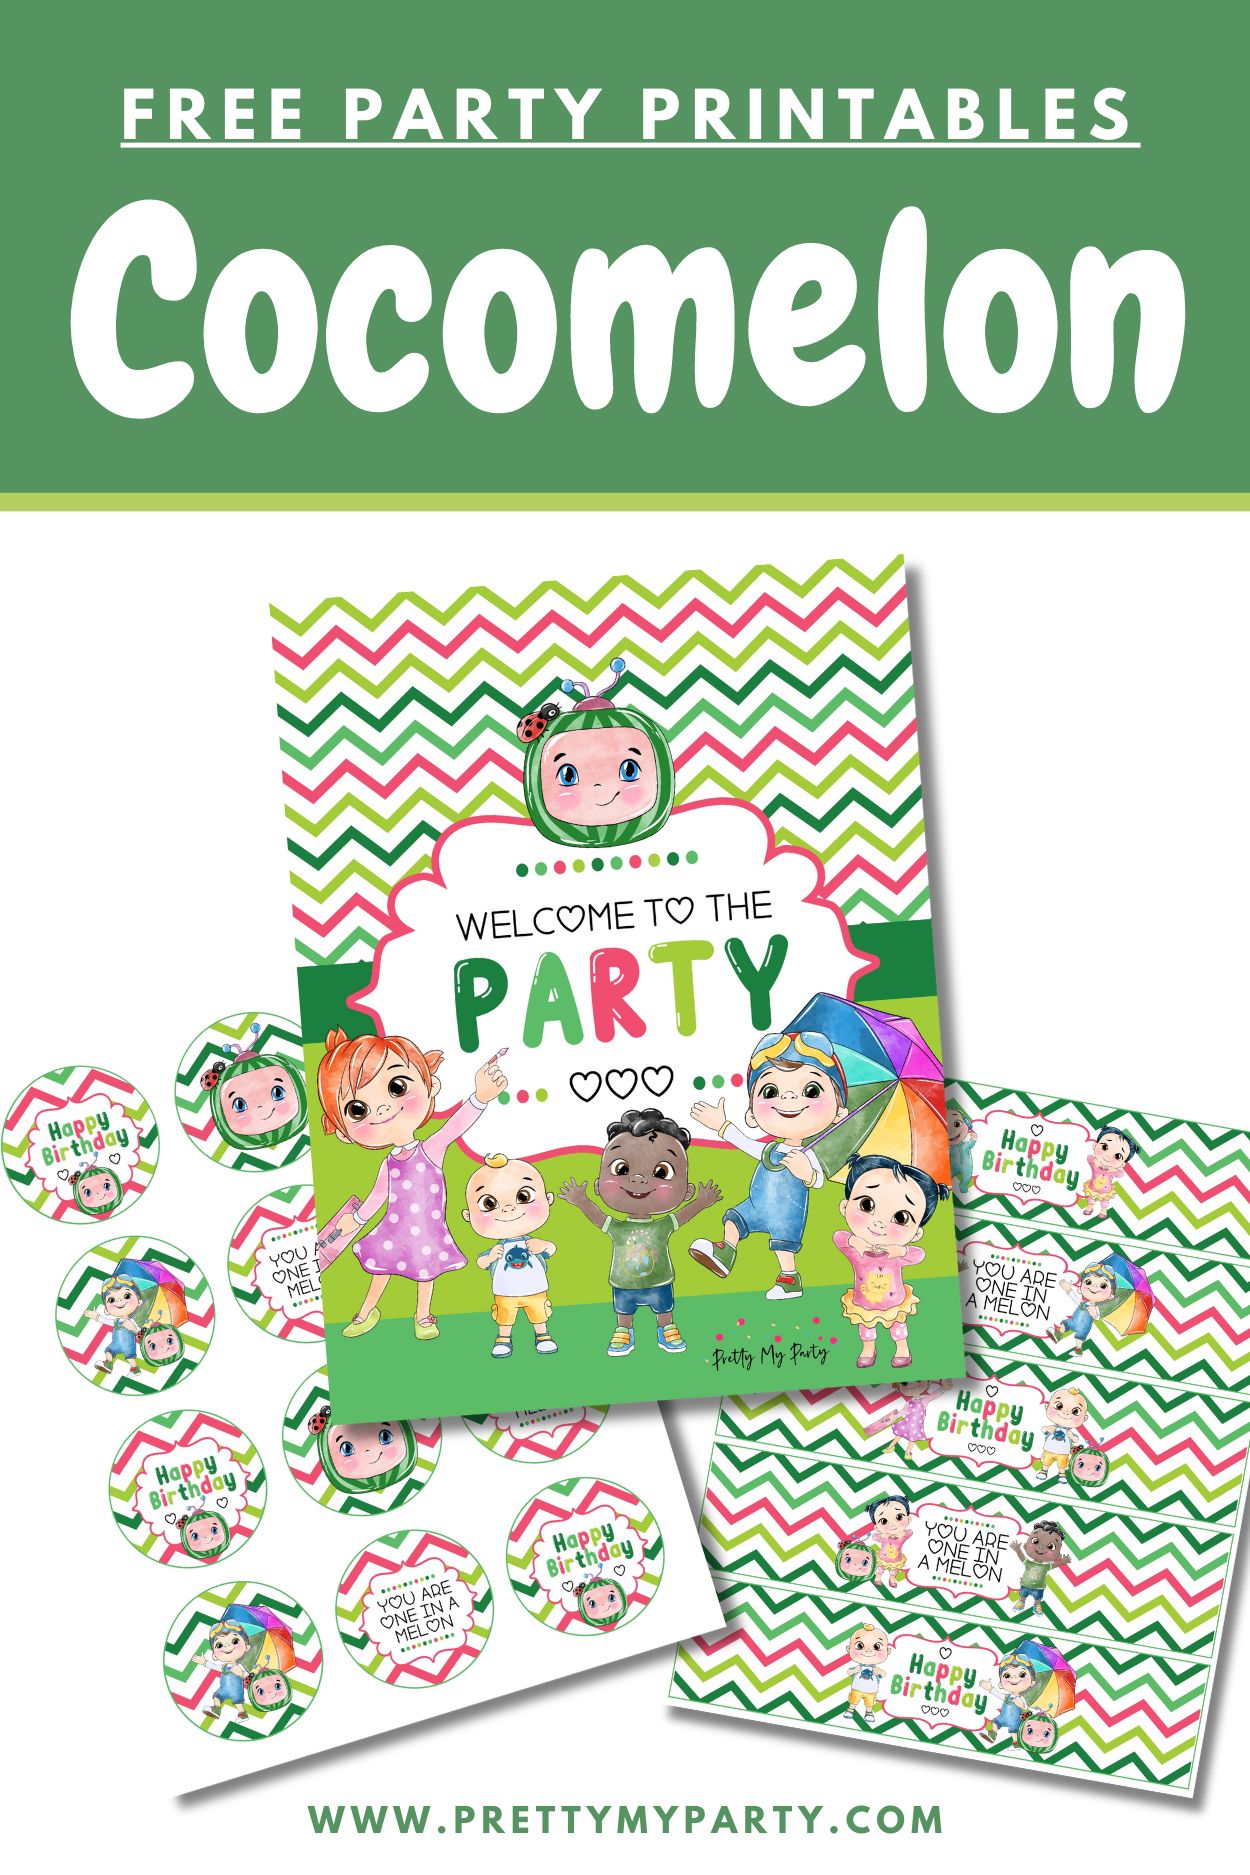 Grab your free Cocomelon Party Printables on Pretty My Party!